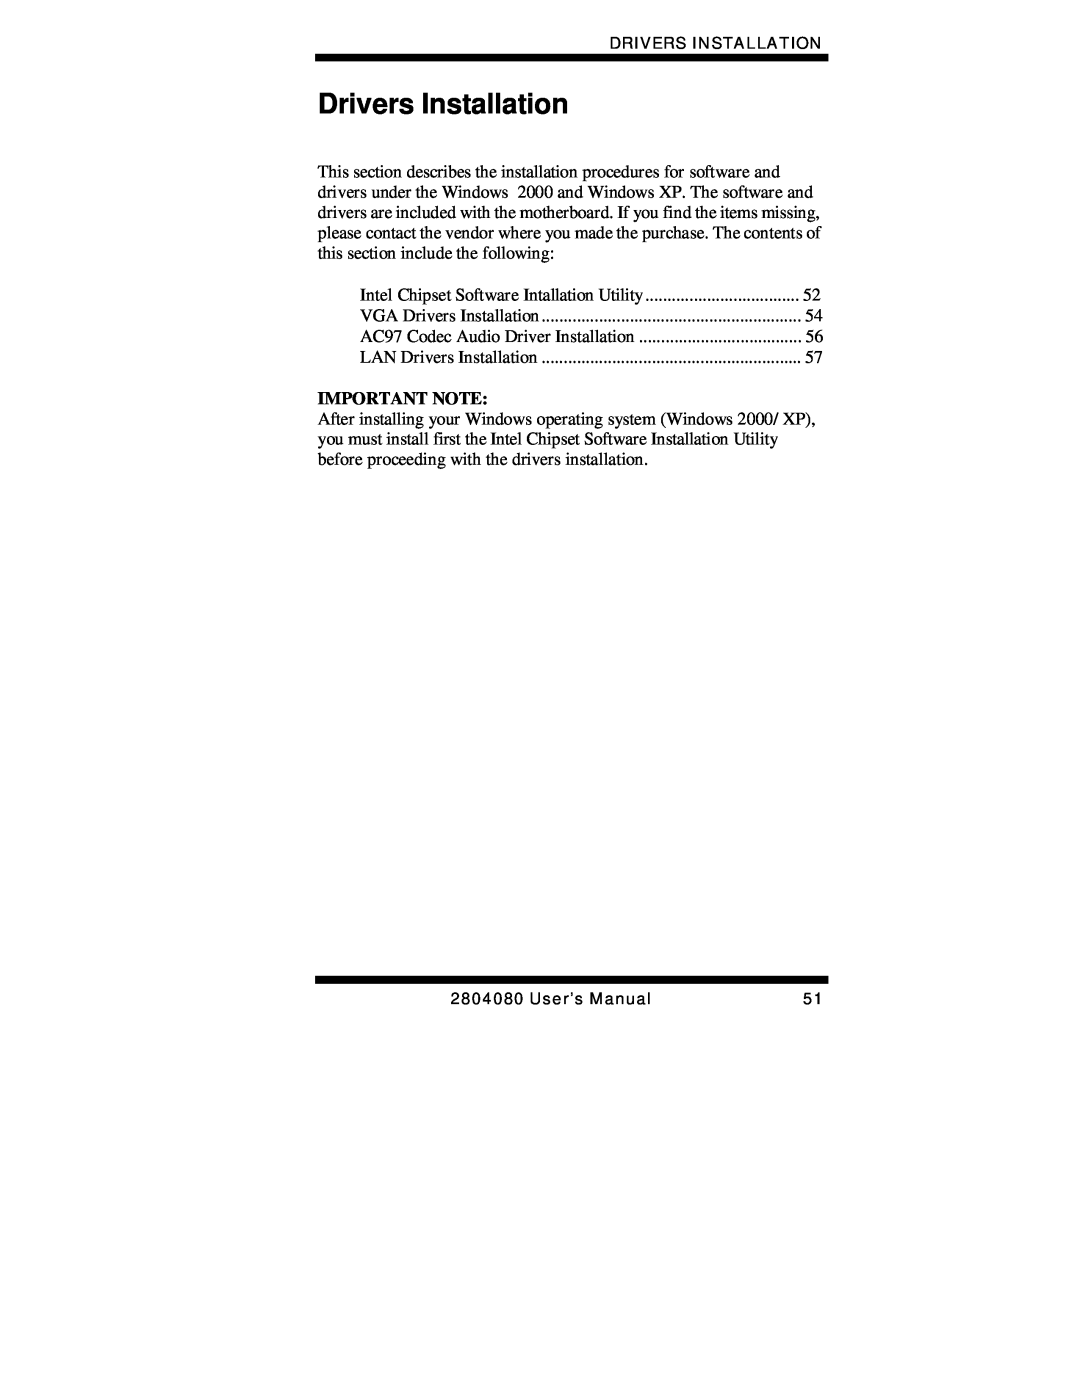 Intel 2804080, Duo/Solo 945GM user manual Drivers Installation, Important Note 